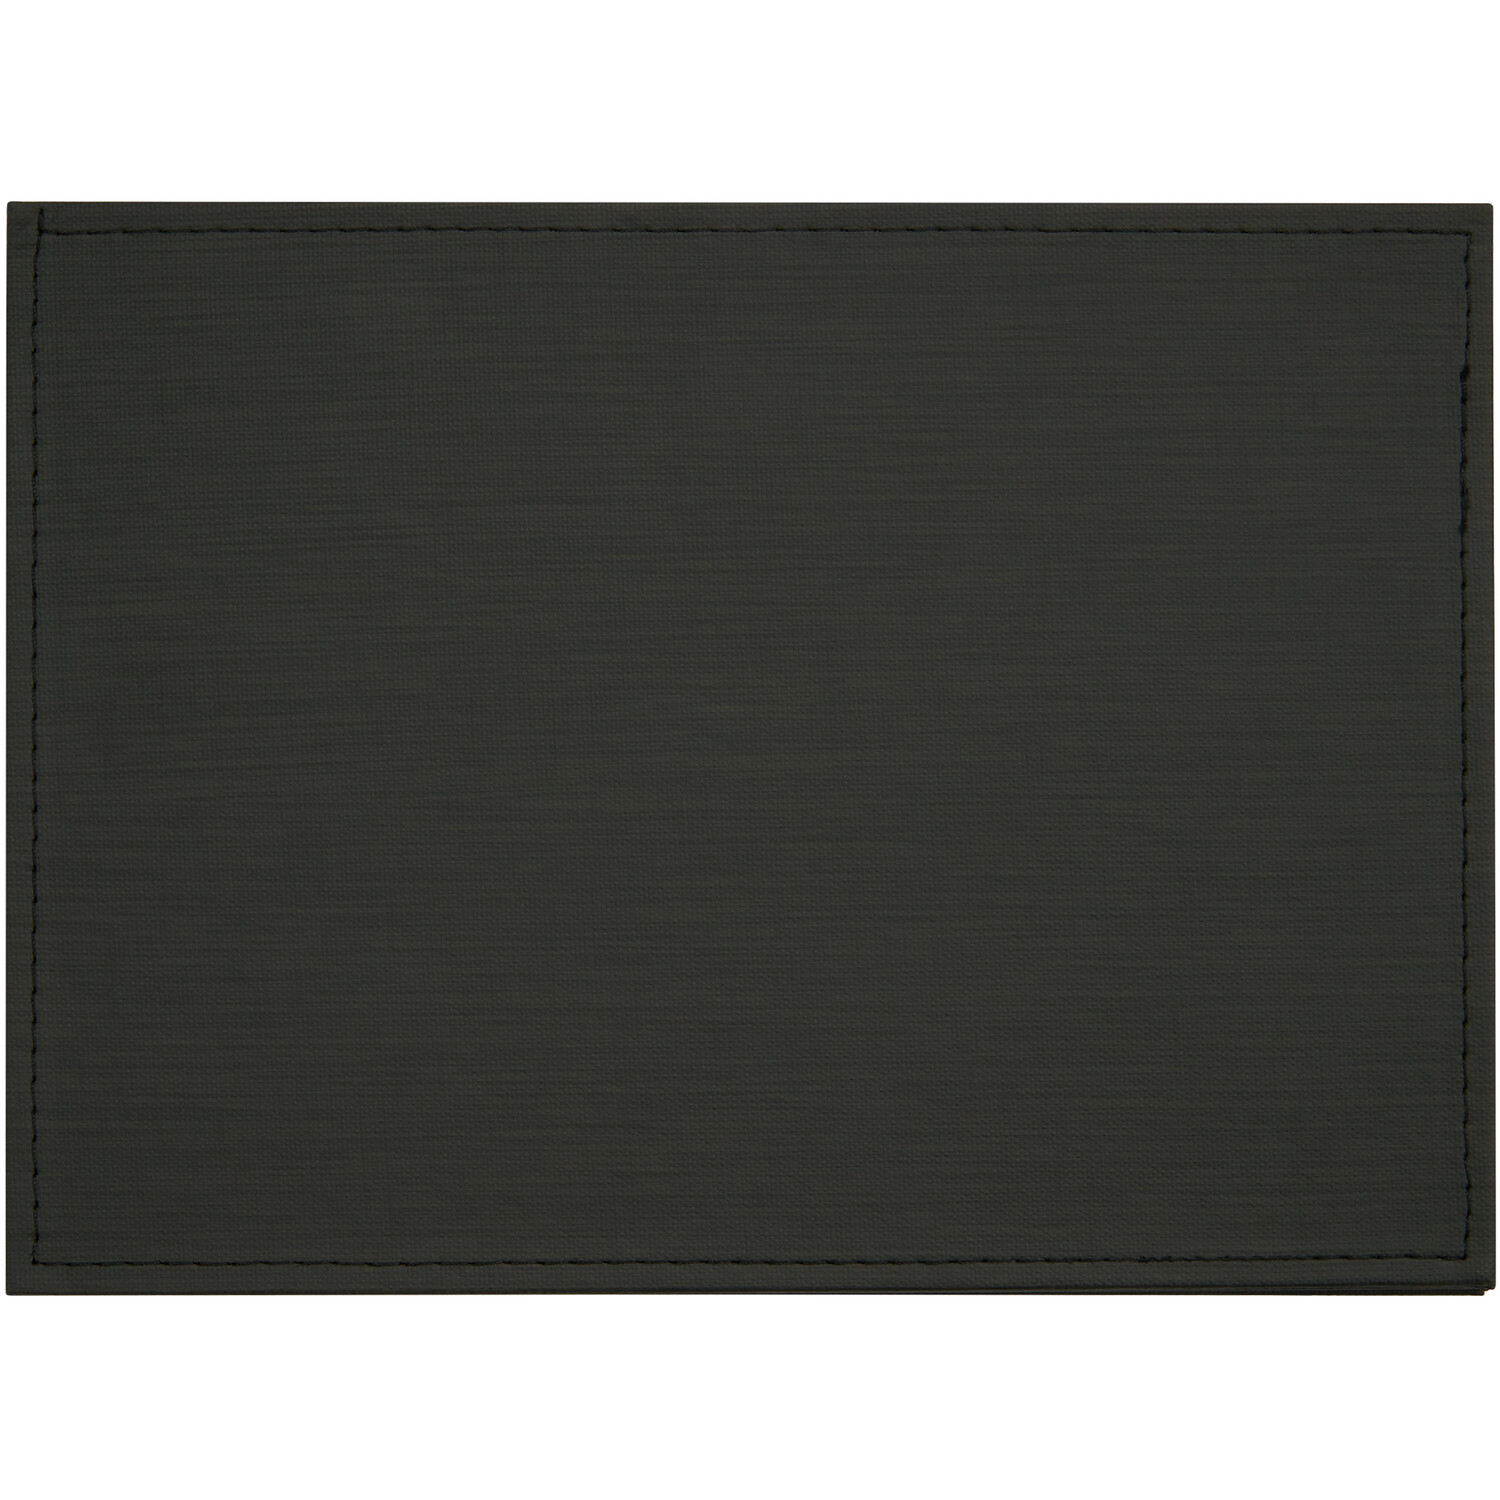 Pack of 4 Linen Texture Placemats - Black Image 3